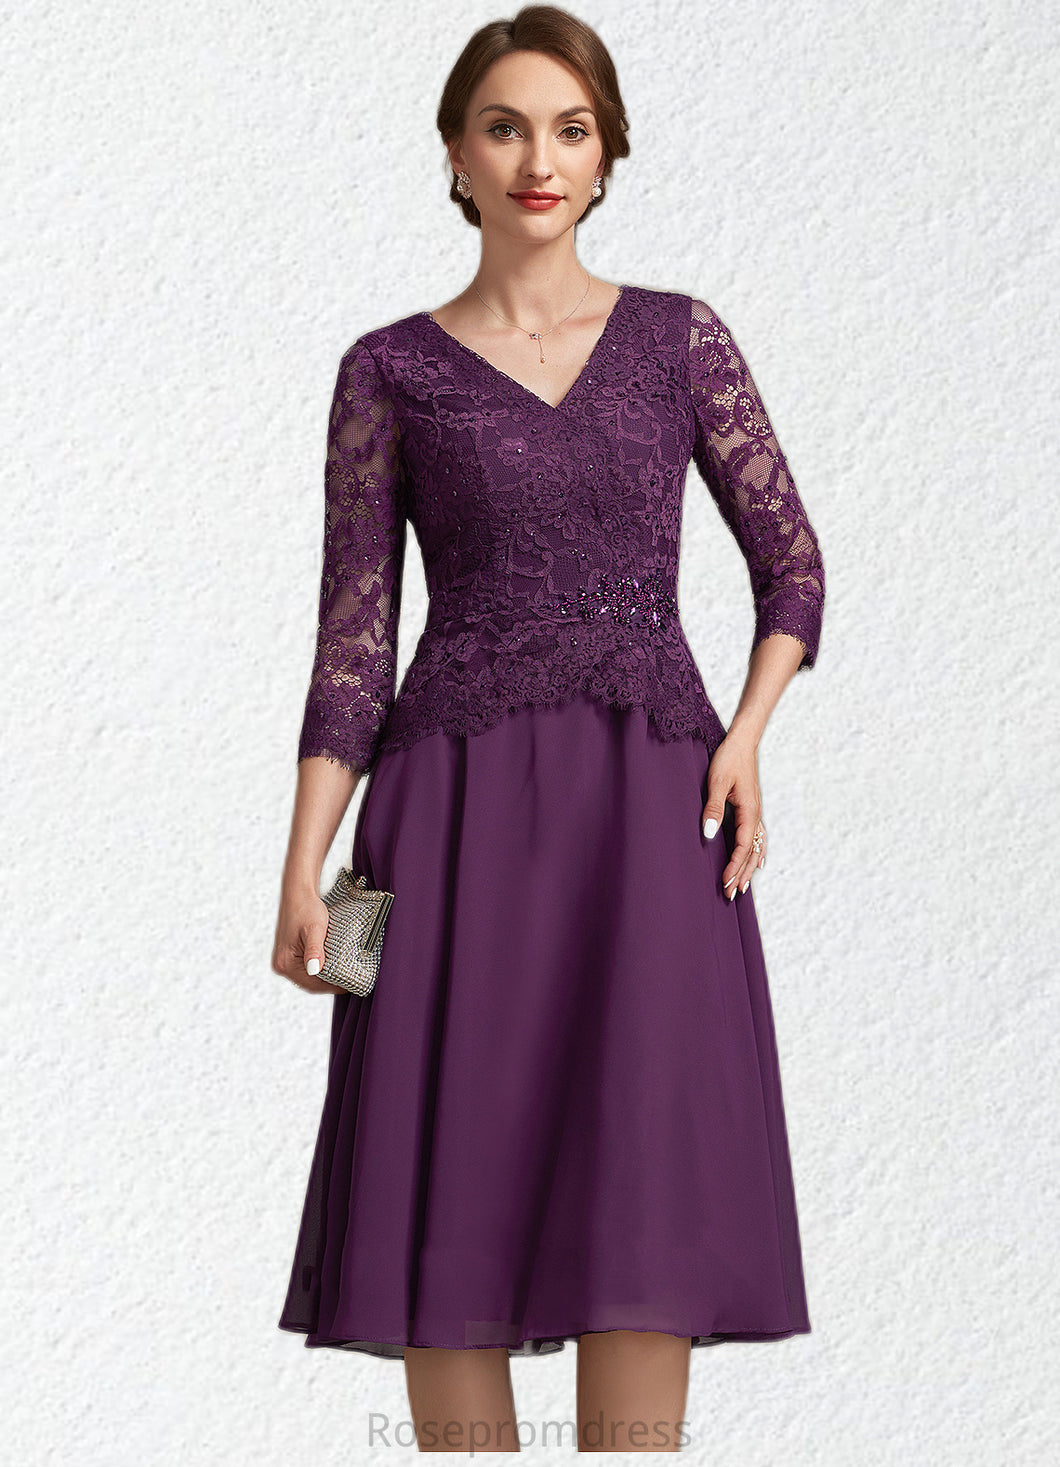 Sophia A-Line V-neck Knee-Length Chiffon Lace Mother of the Bride Dress With Beading Sequins SRS126P0015035